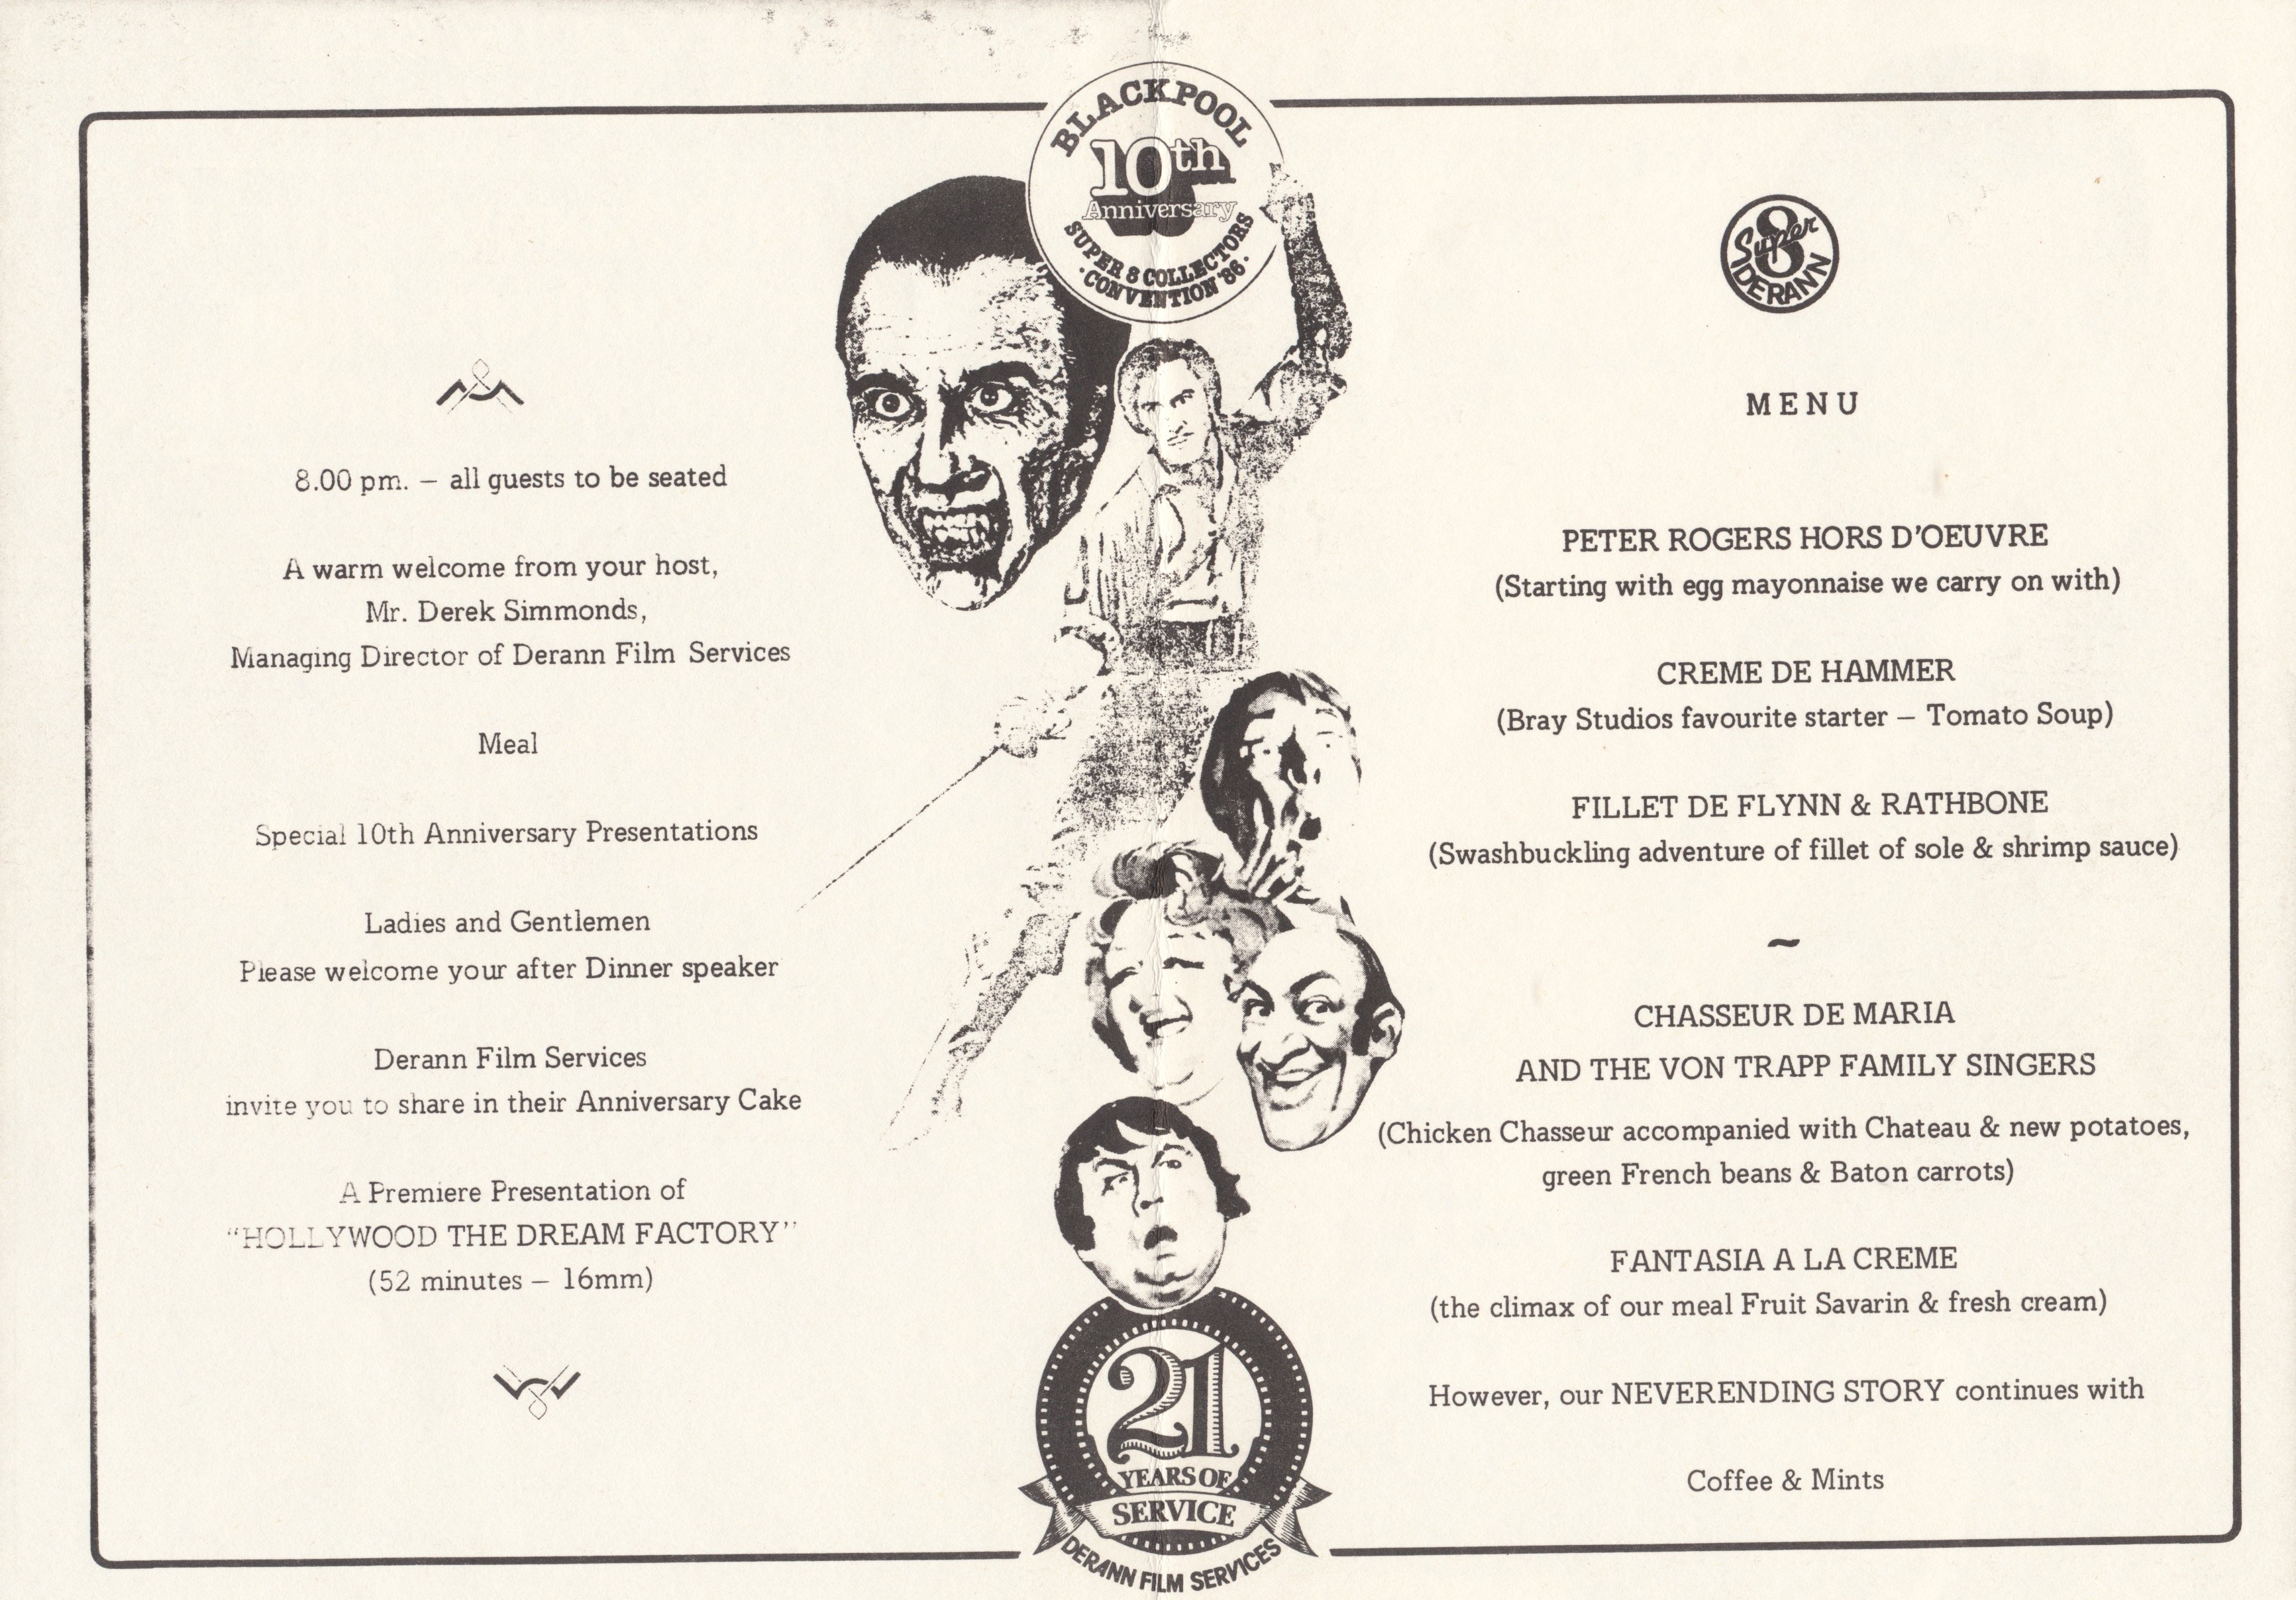 1986 Convention Dinner programme, page 2-3